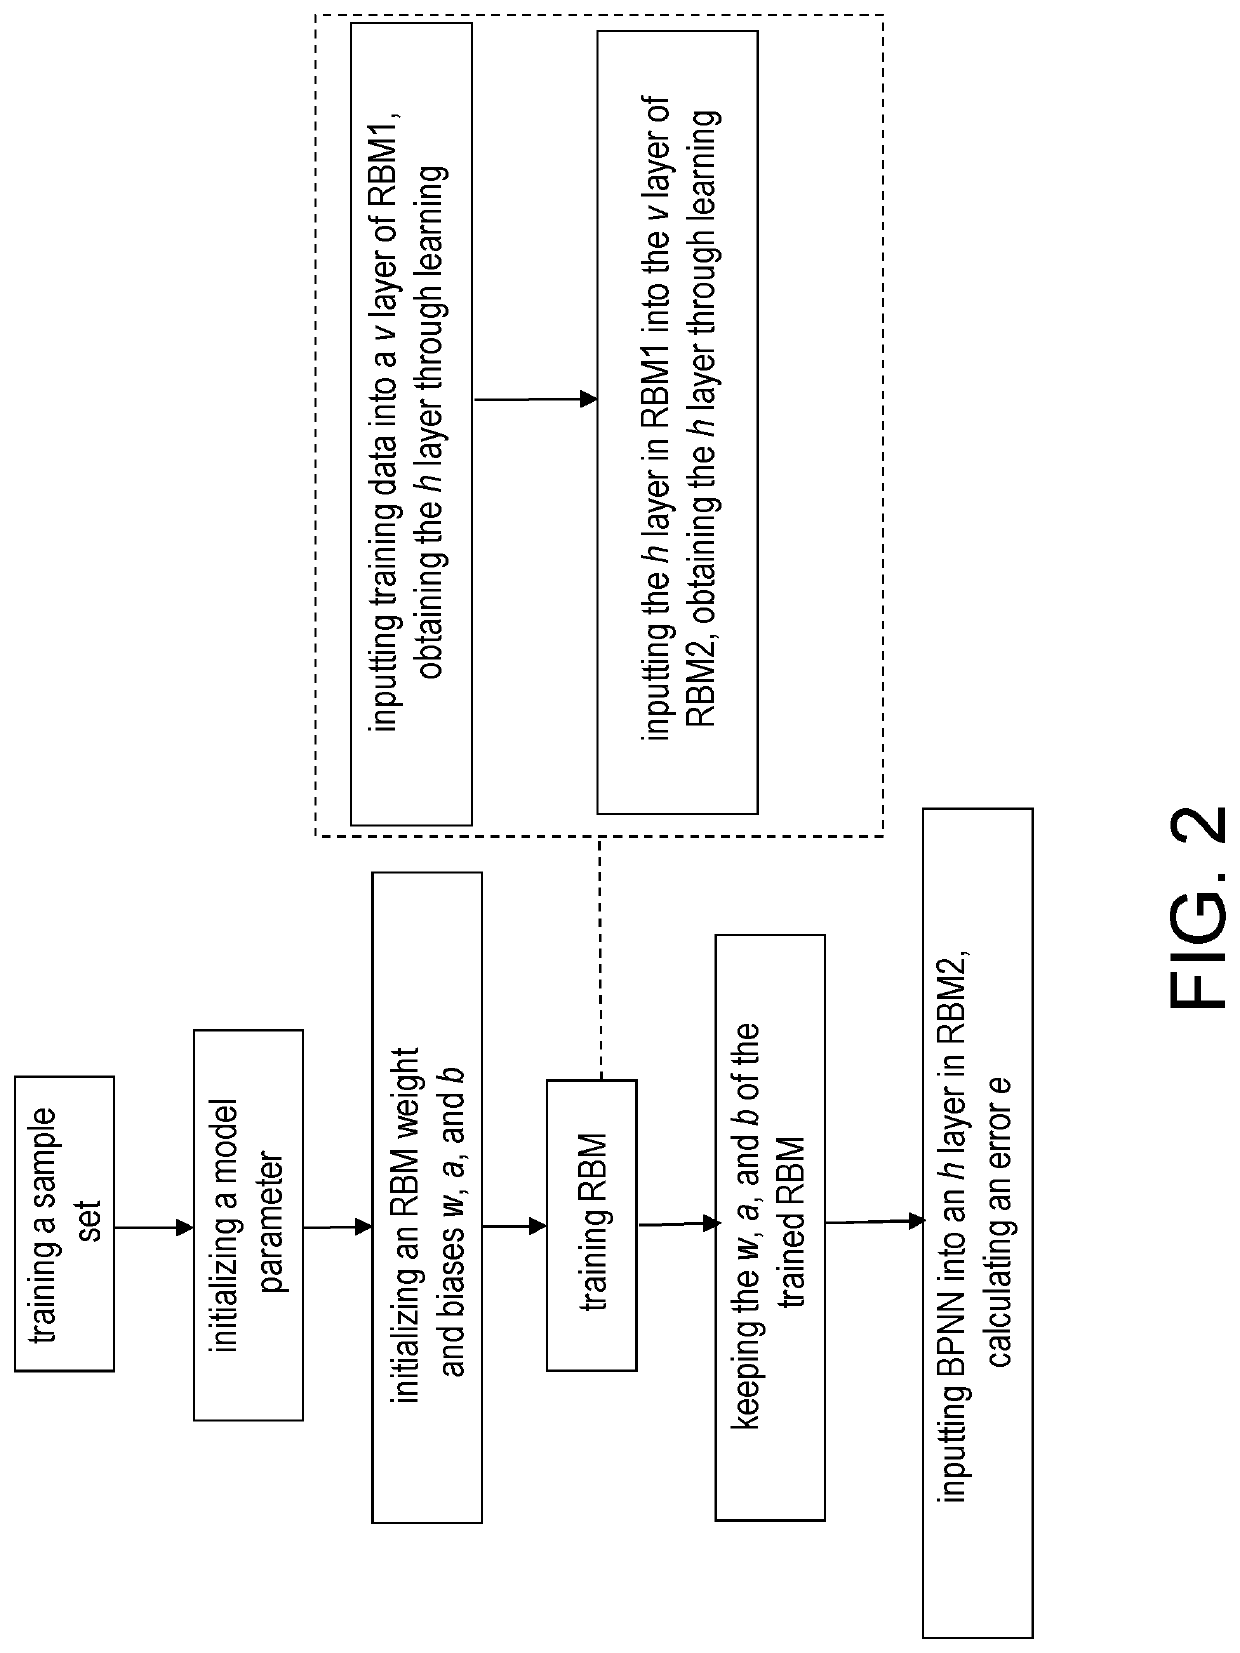 Method and system for predicting gas content in transformer oil based on joint model